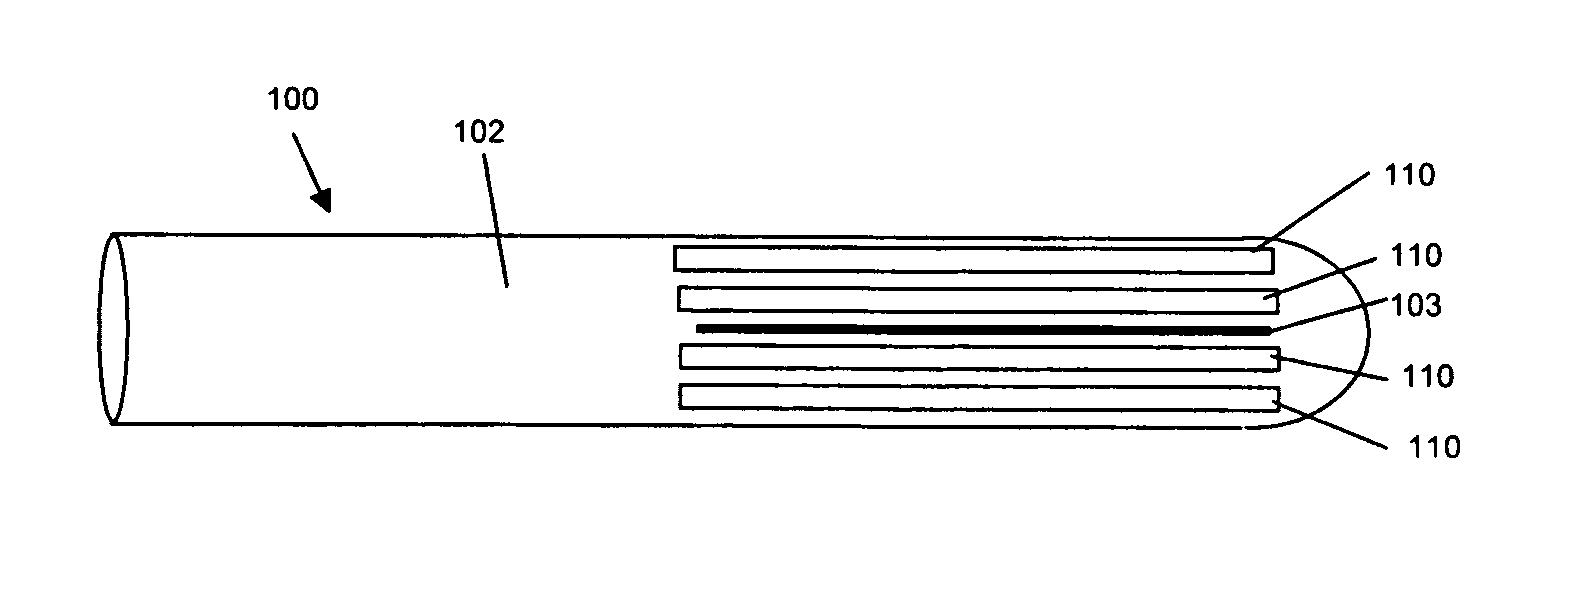 Electronically activated capture device